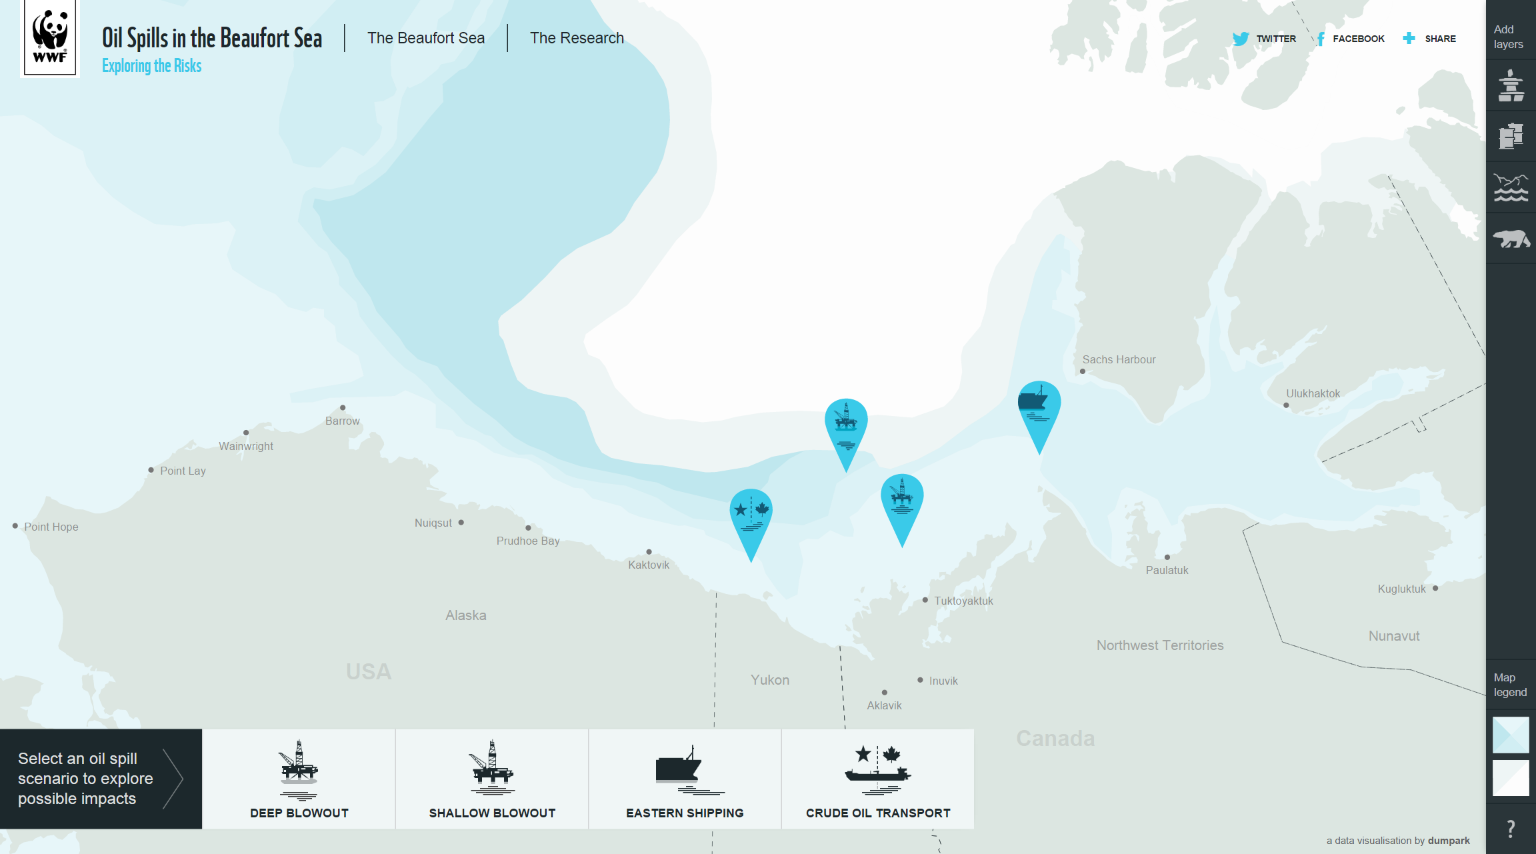 Oil spills in the Beaufort Sea